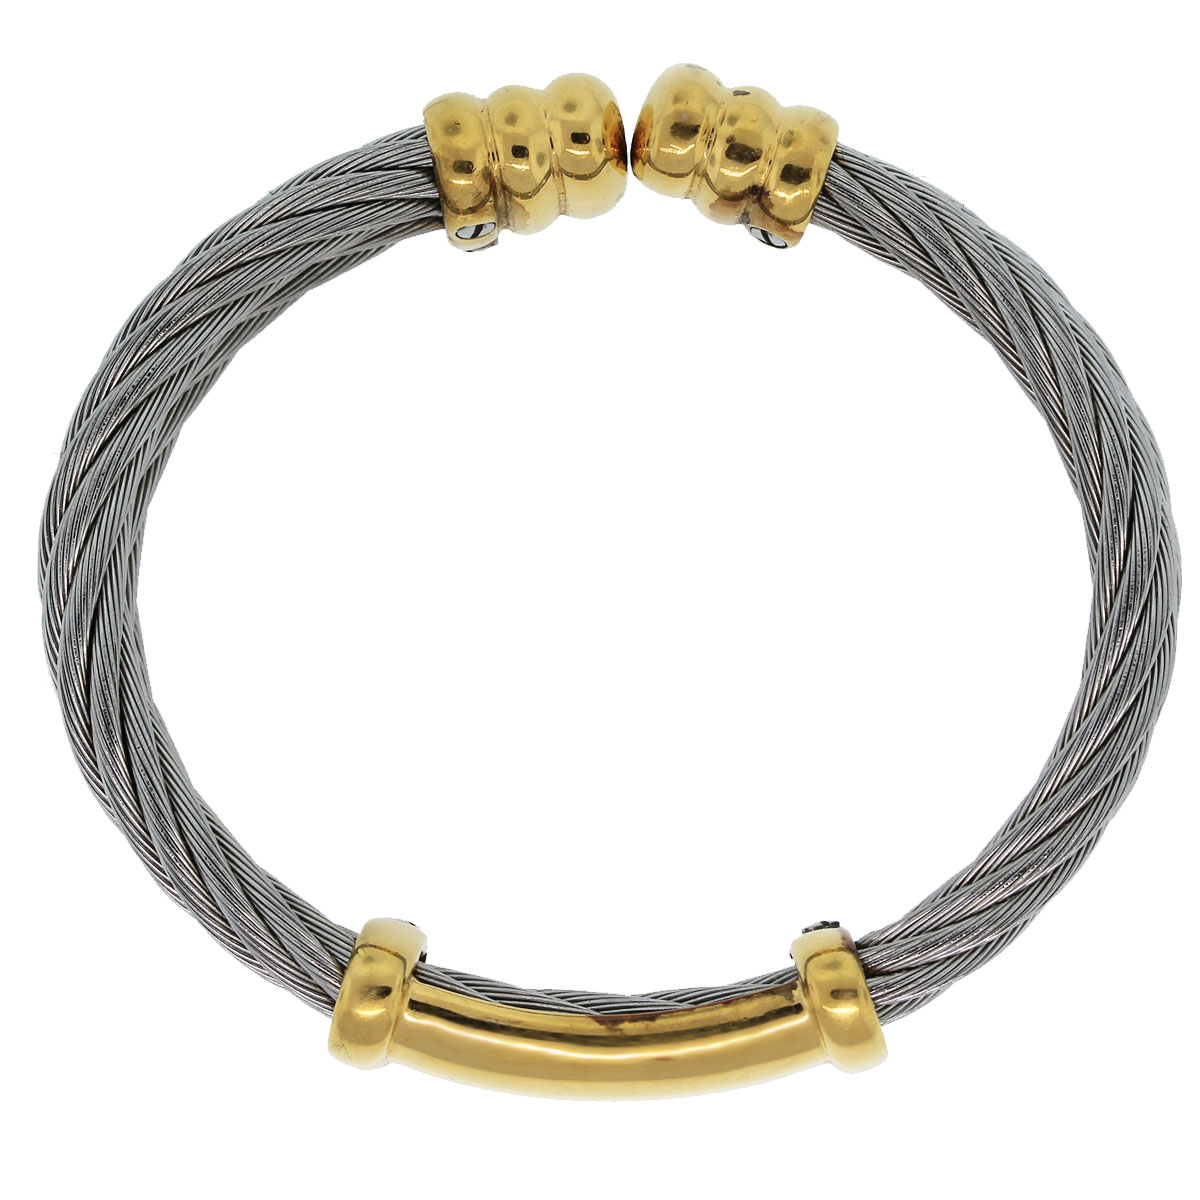 Philippe Charriol Stainless Steel Gold Plated Double Cable Bangle